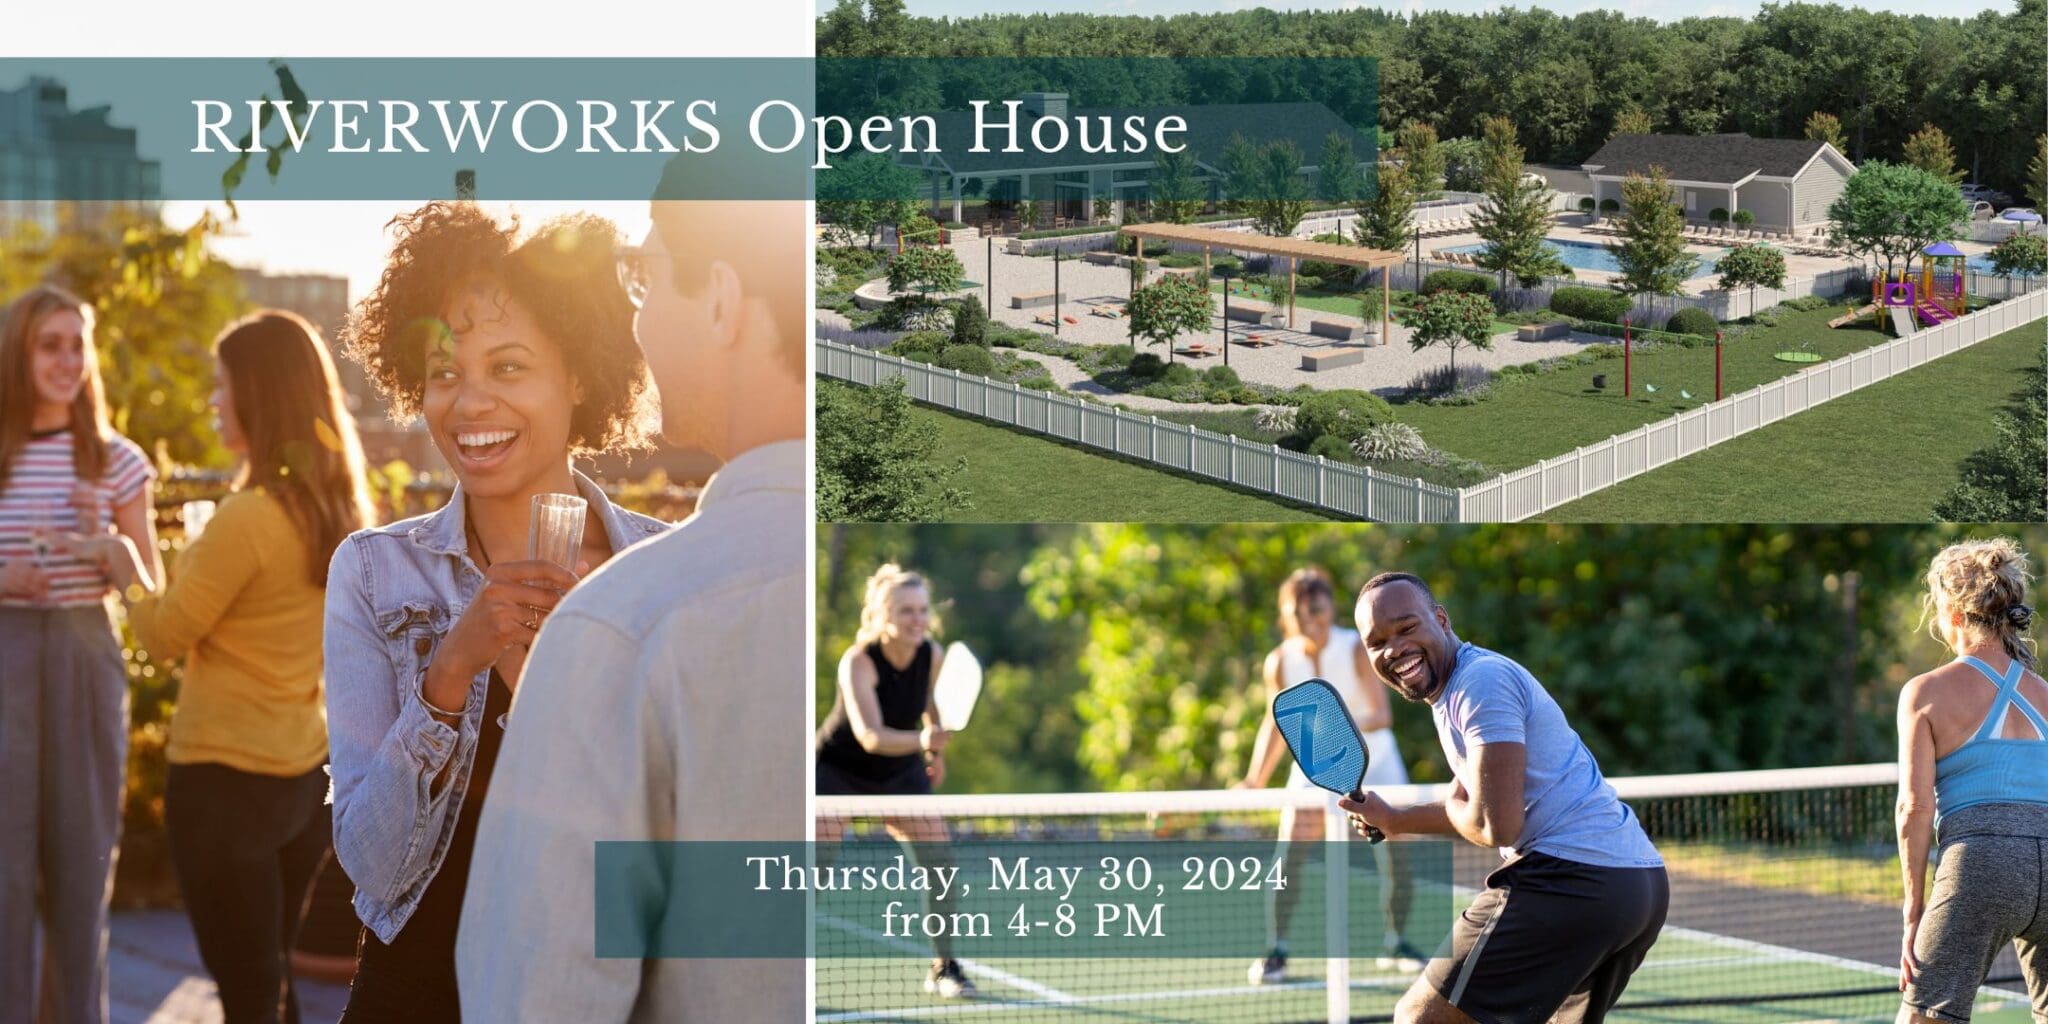 RIVERWORKS Open House Event